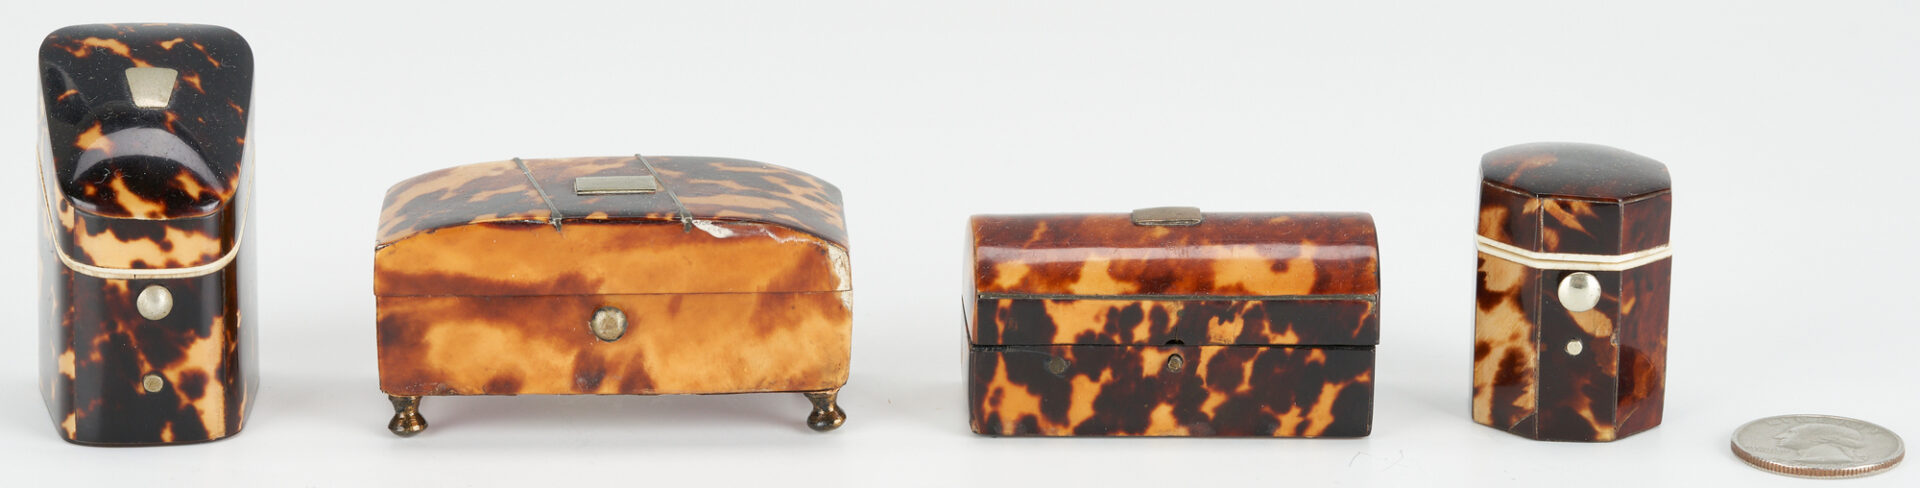 Lot 107: 4 Miniature Tortoiseshell Boxes, Sewing Related